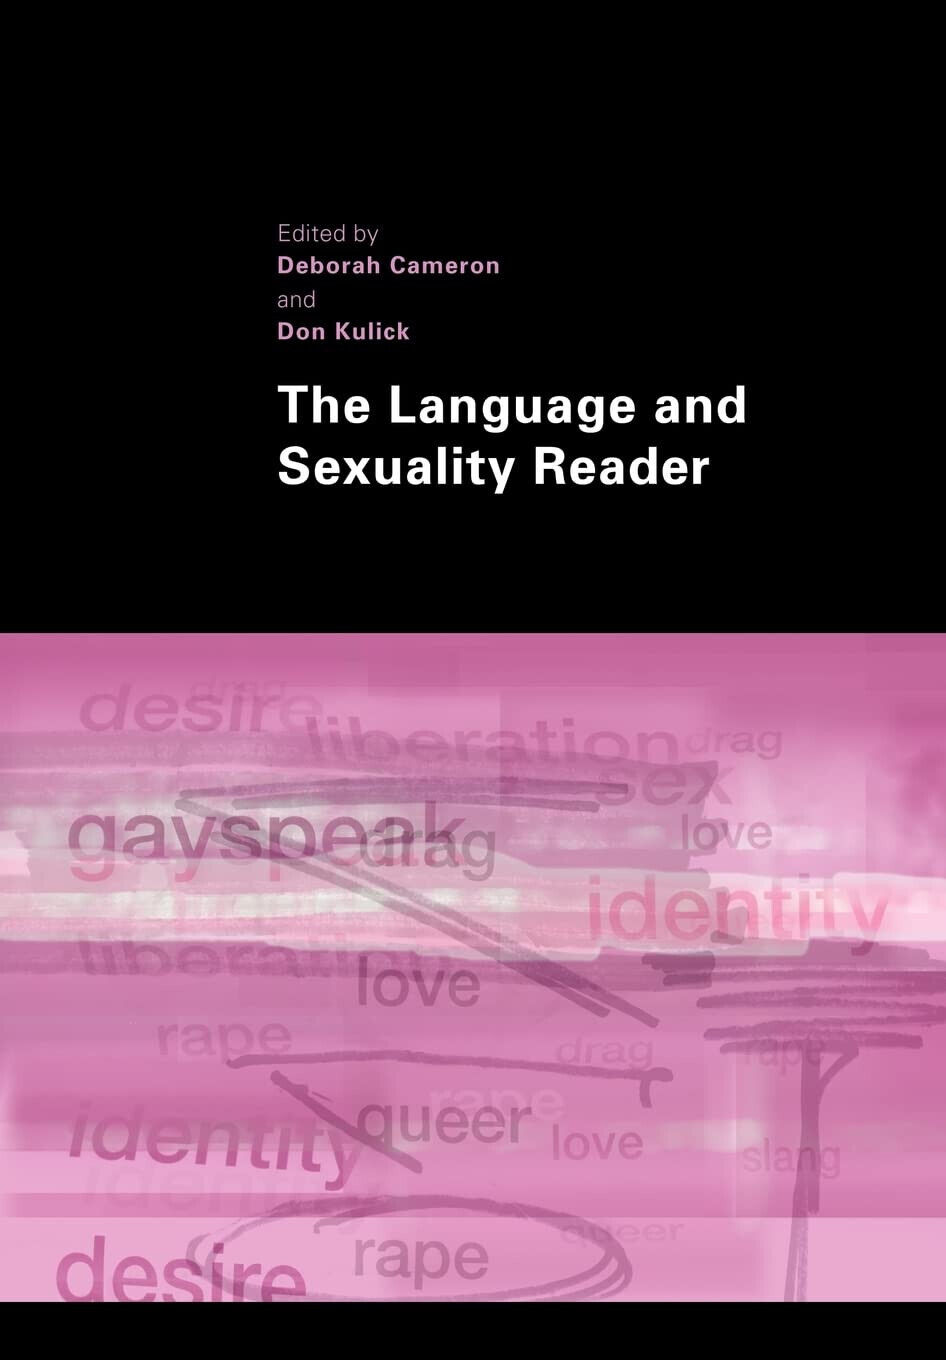 The Language and Sexuality Reader - Deborah Cameron - Routledge, 2006